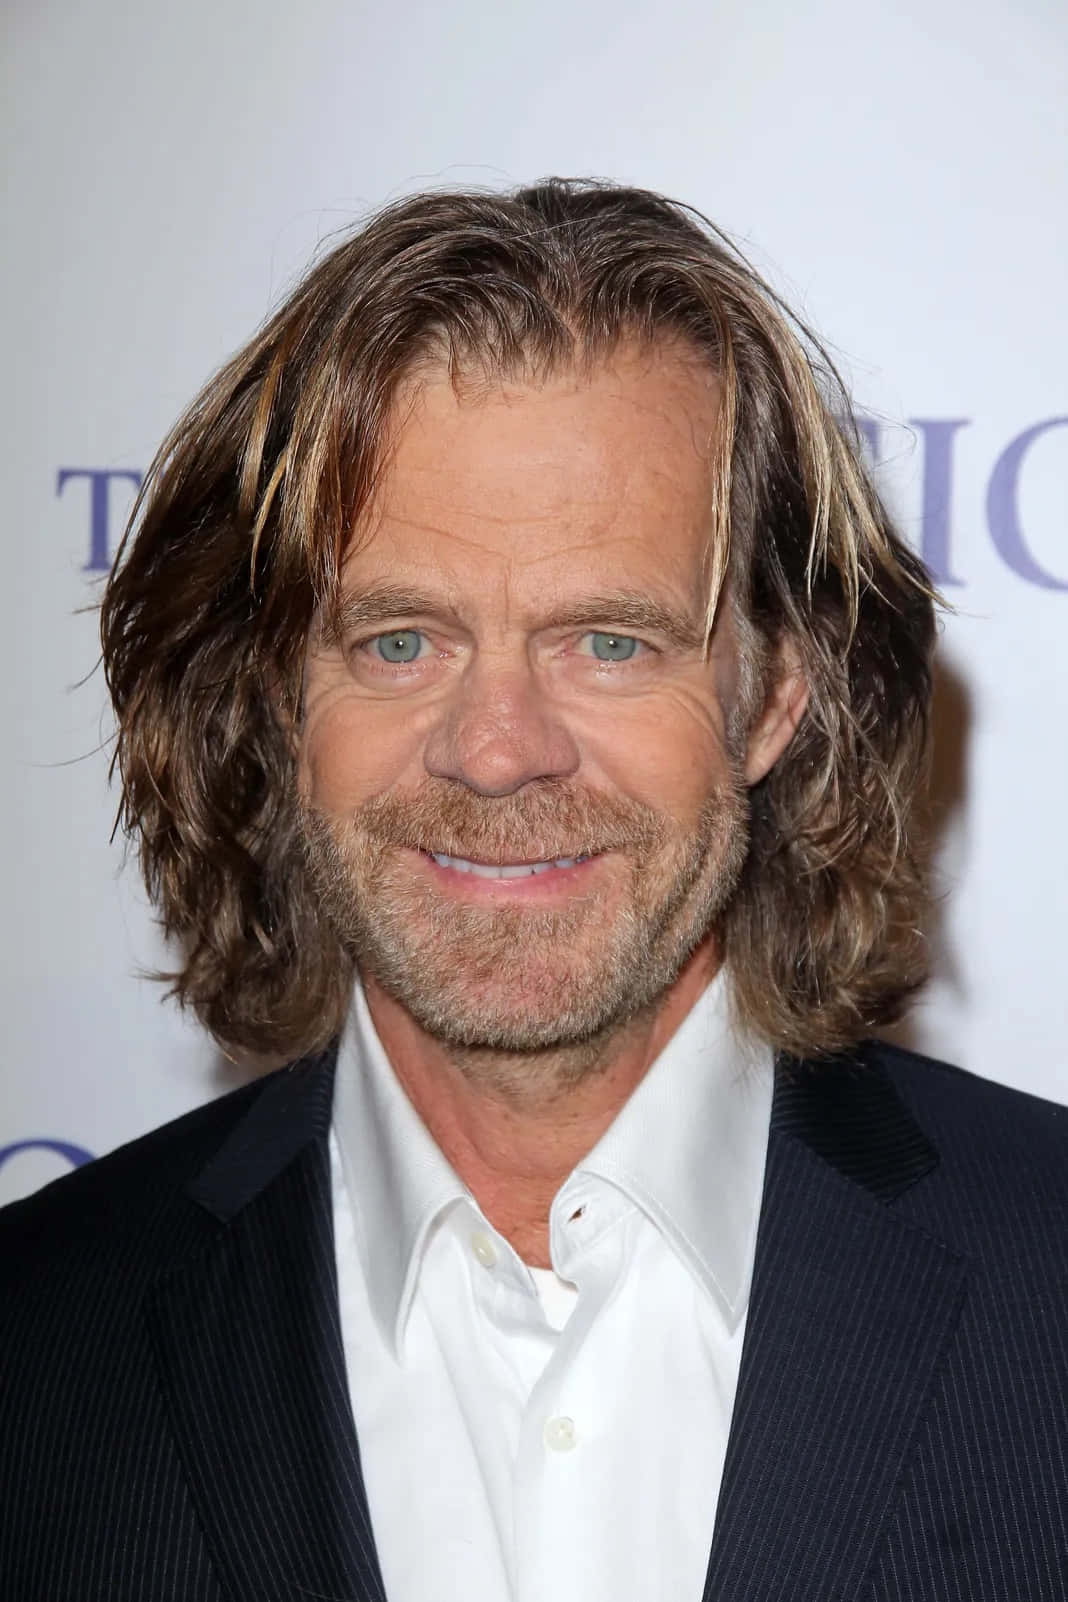 William H. Macy - Talented Actor In A Pensive Pose